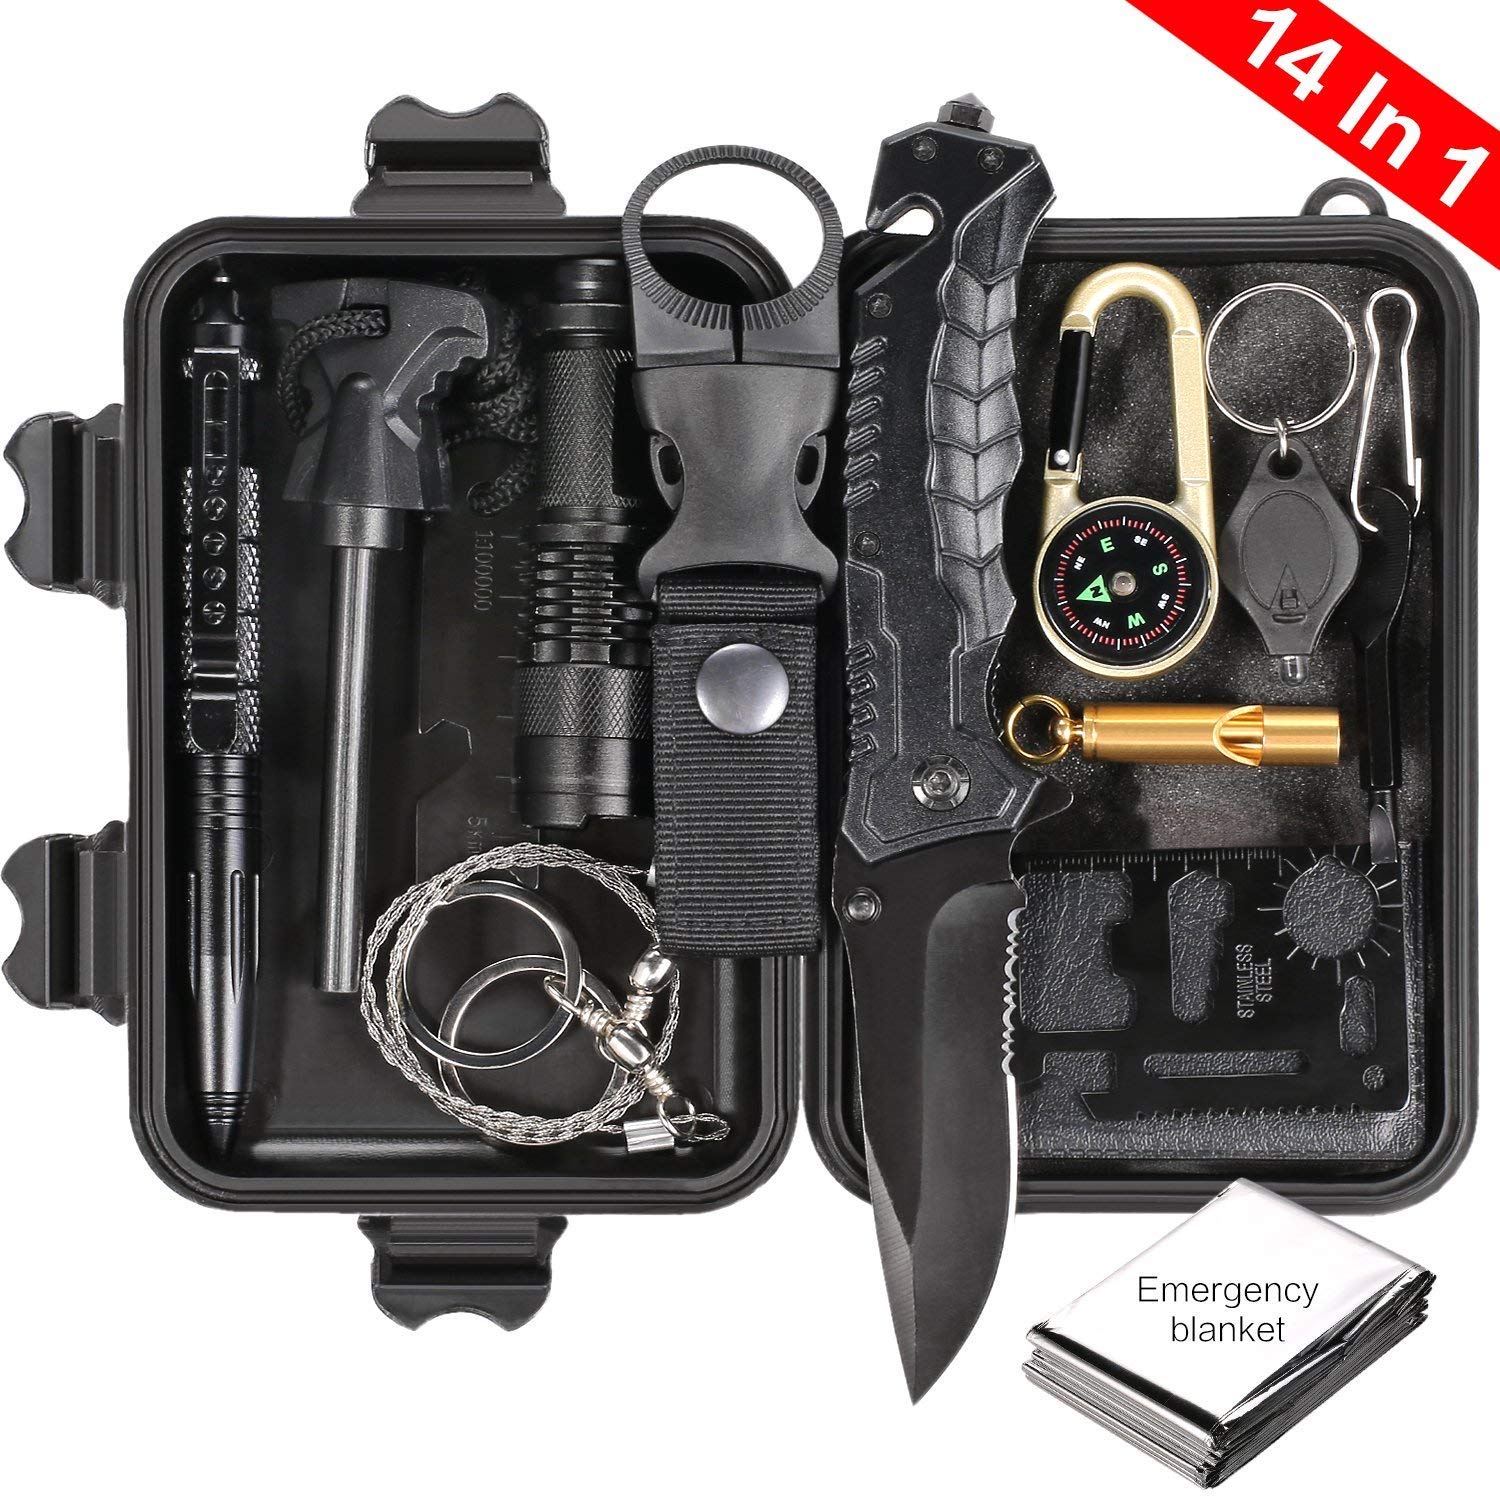 Puhibuox Survival Gear Kit, EDC Outdoor Emergency Tactical Survival Tool for Cars, Camping, Hiking, Hunting, Adventure Accessories